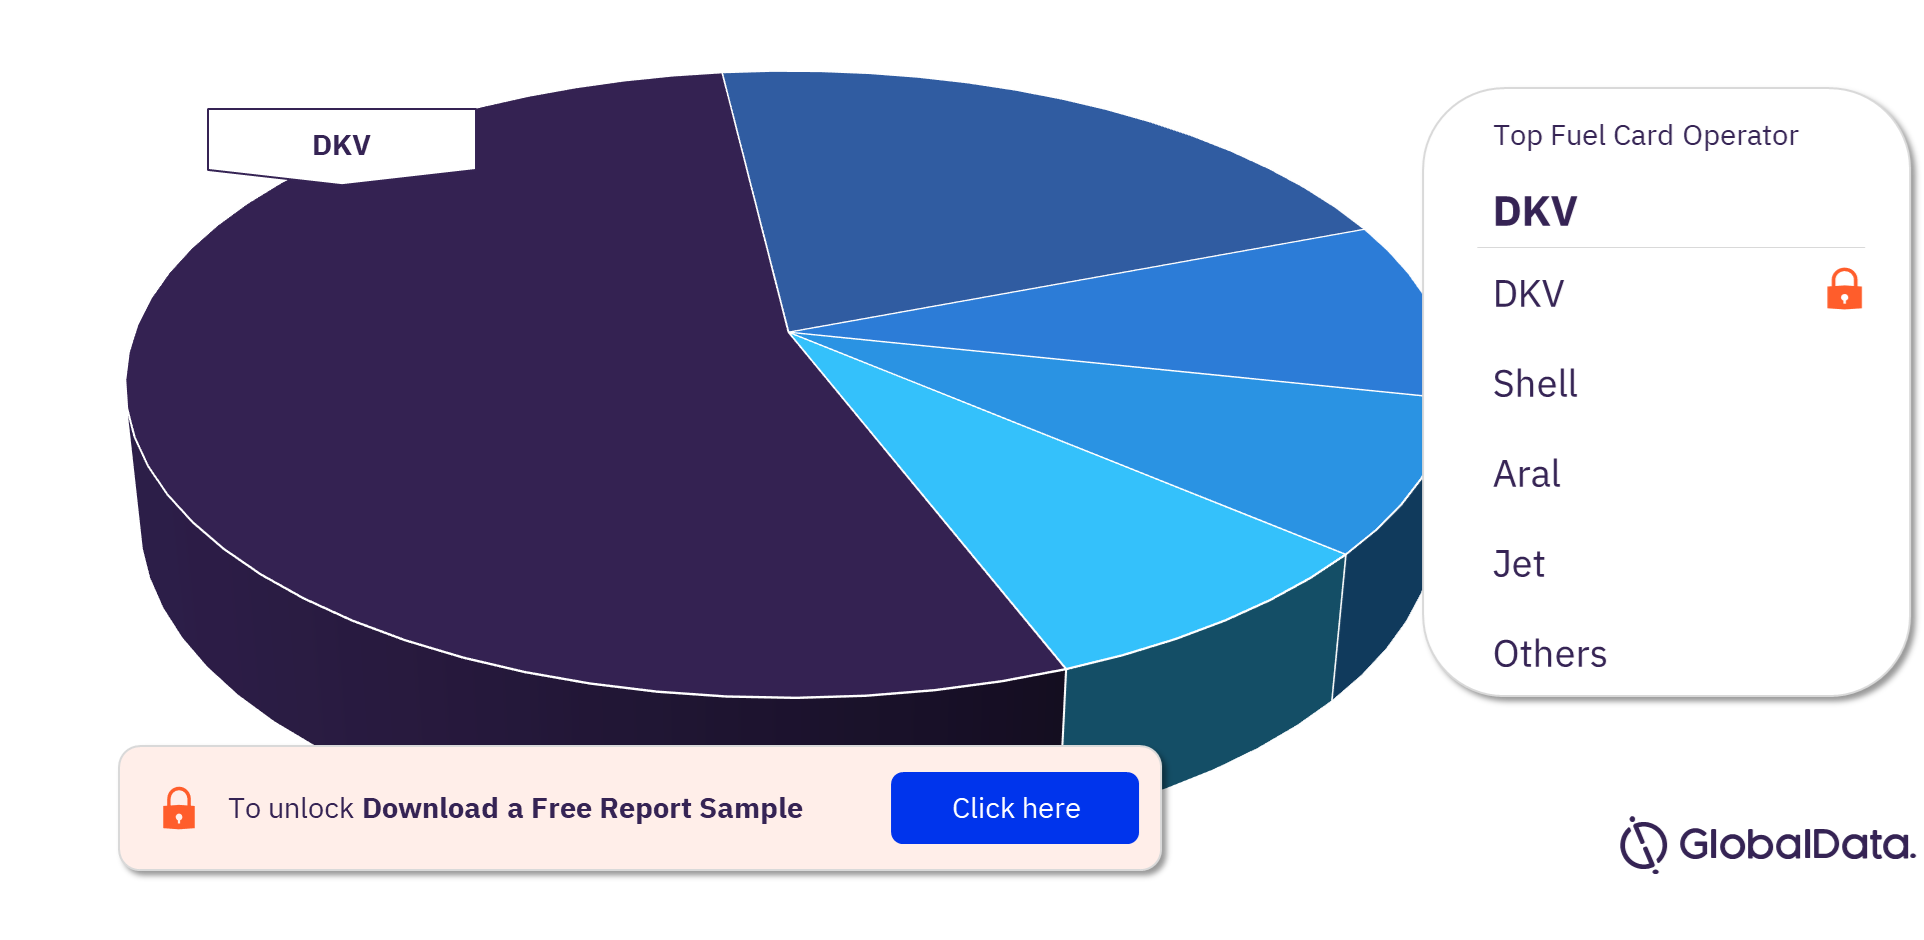 Germany Fuel Cards Market Analysis by Fuel Card Operators, 2022 (%)